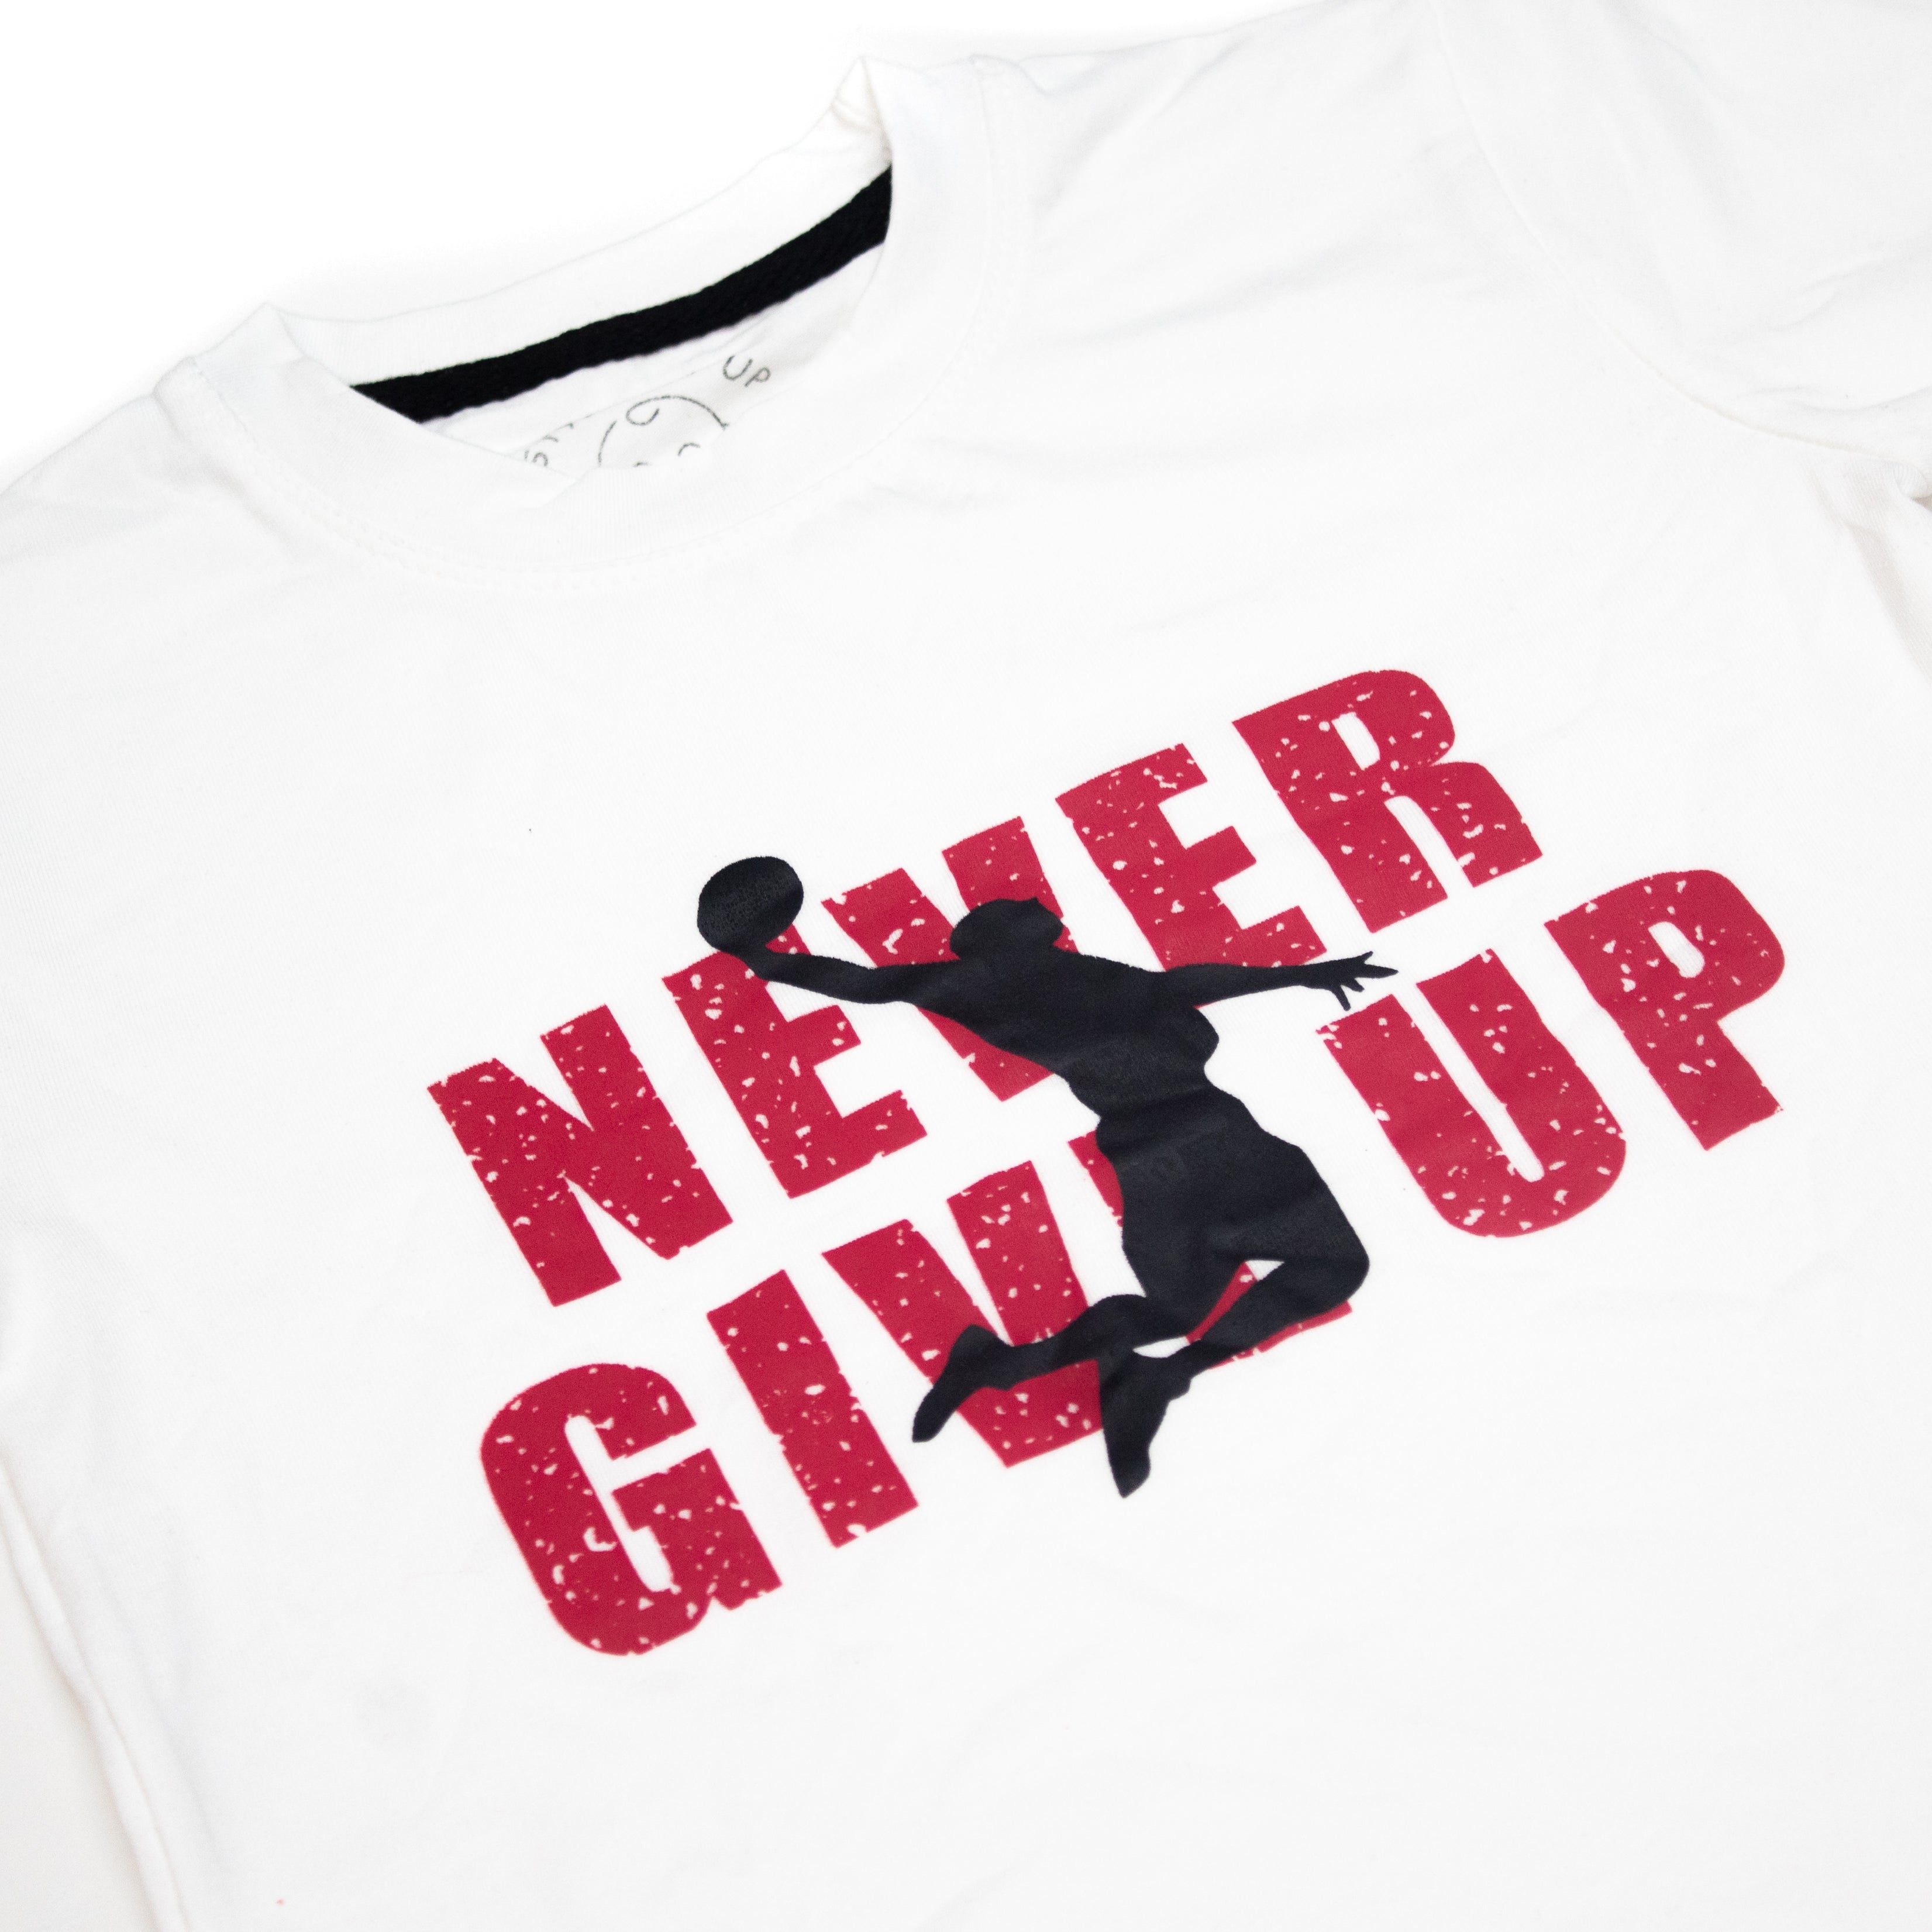 Never Give Up T-Shirt And Shorts For Kids